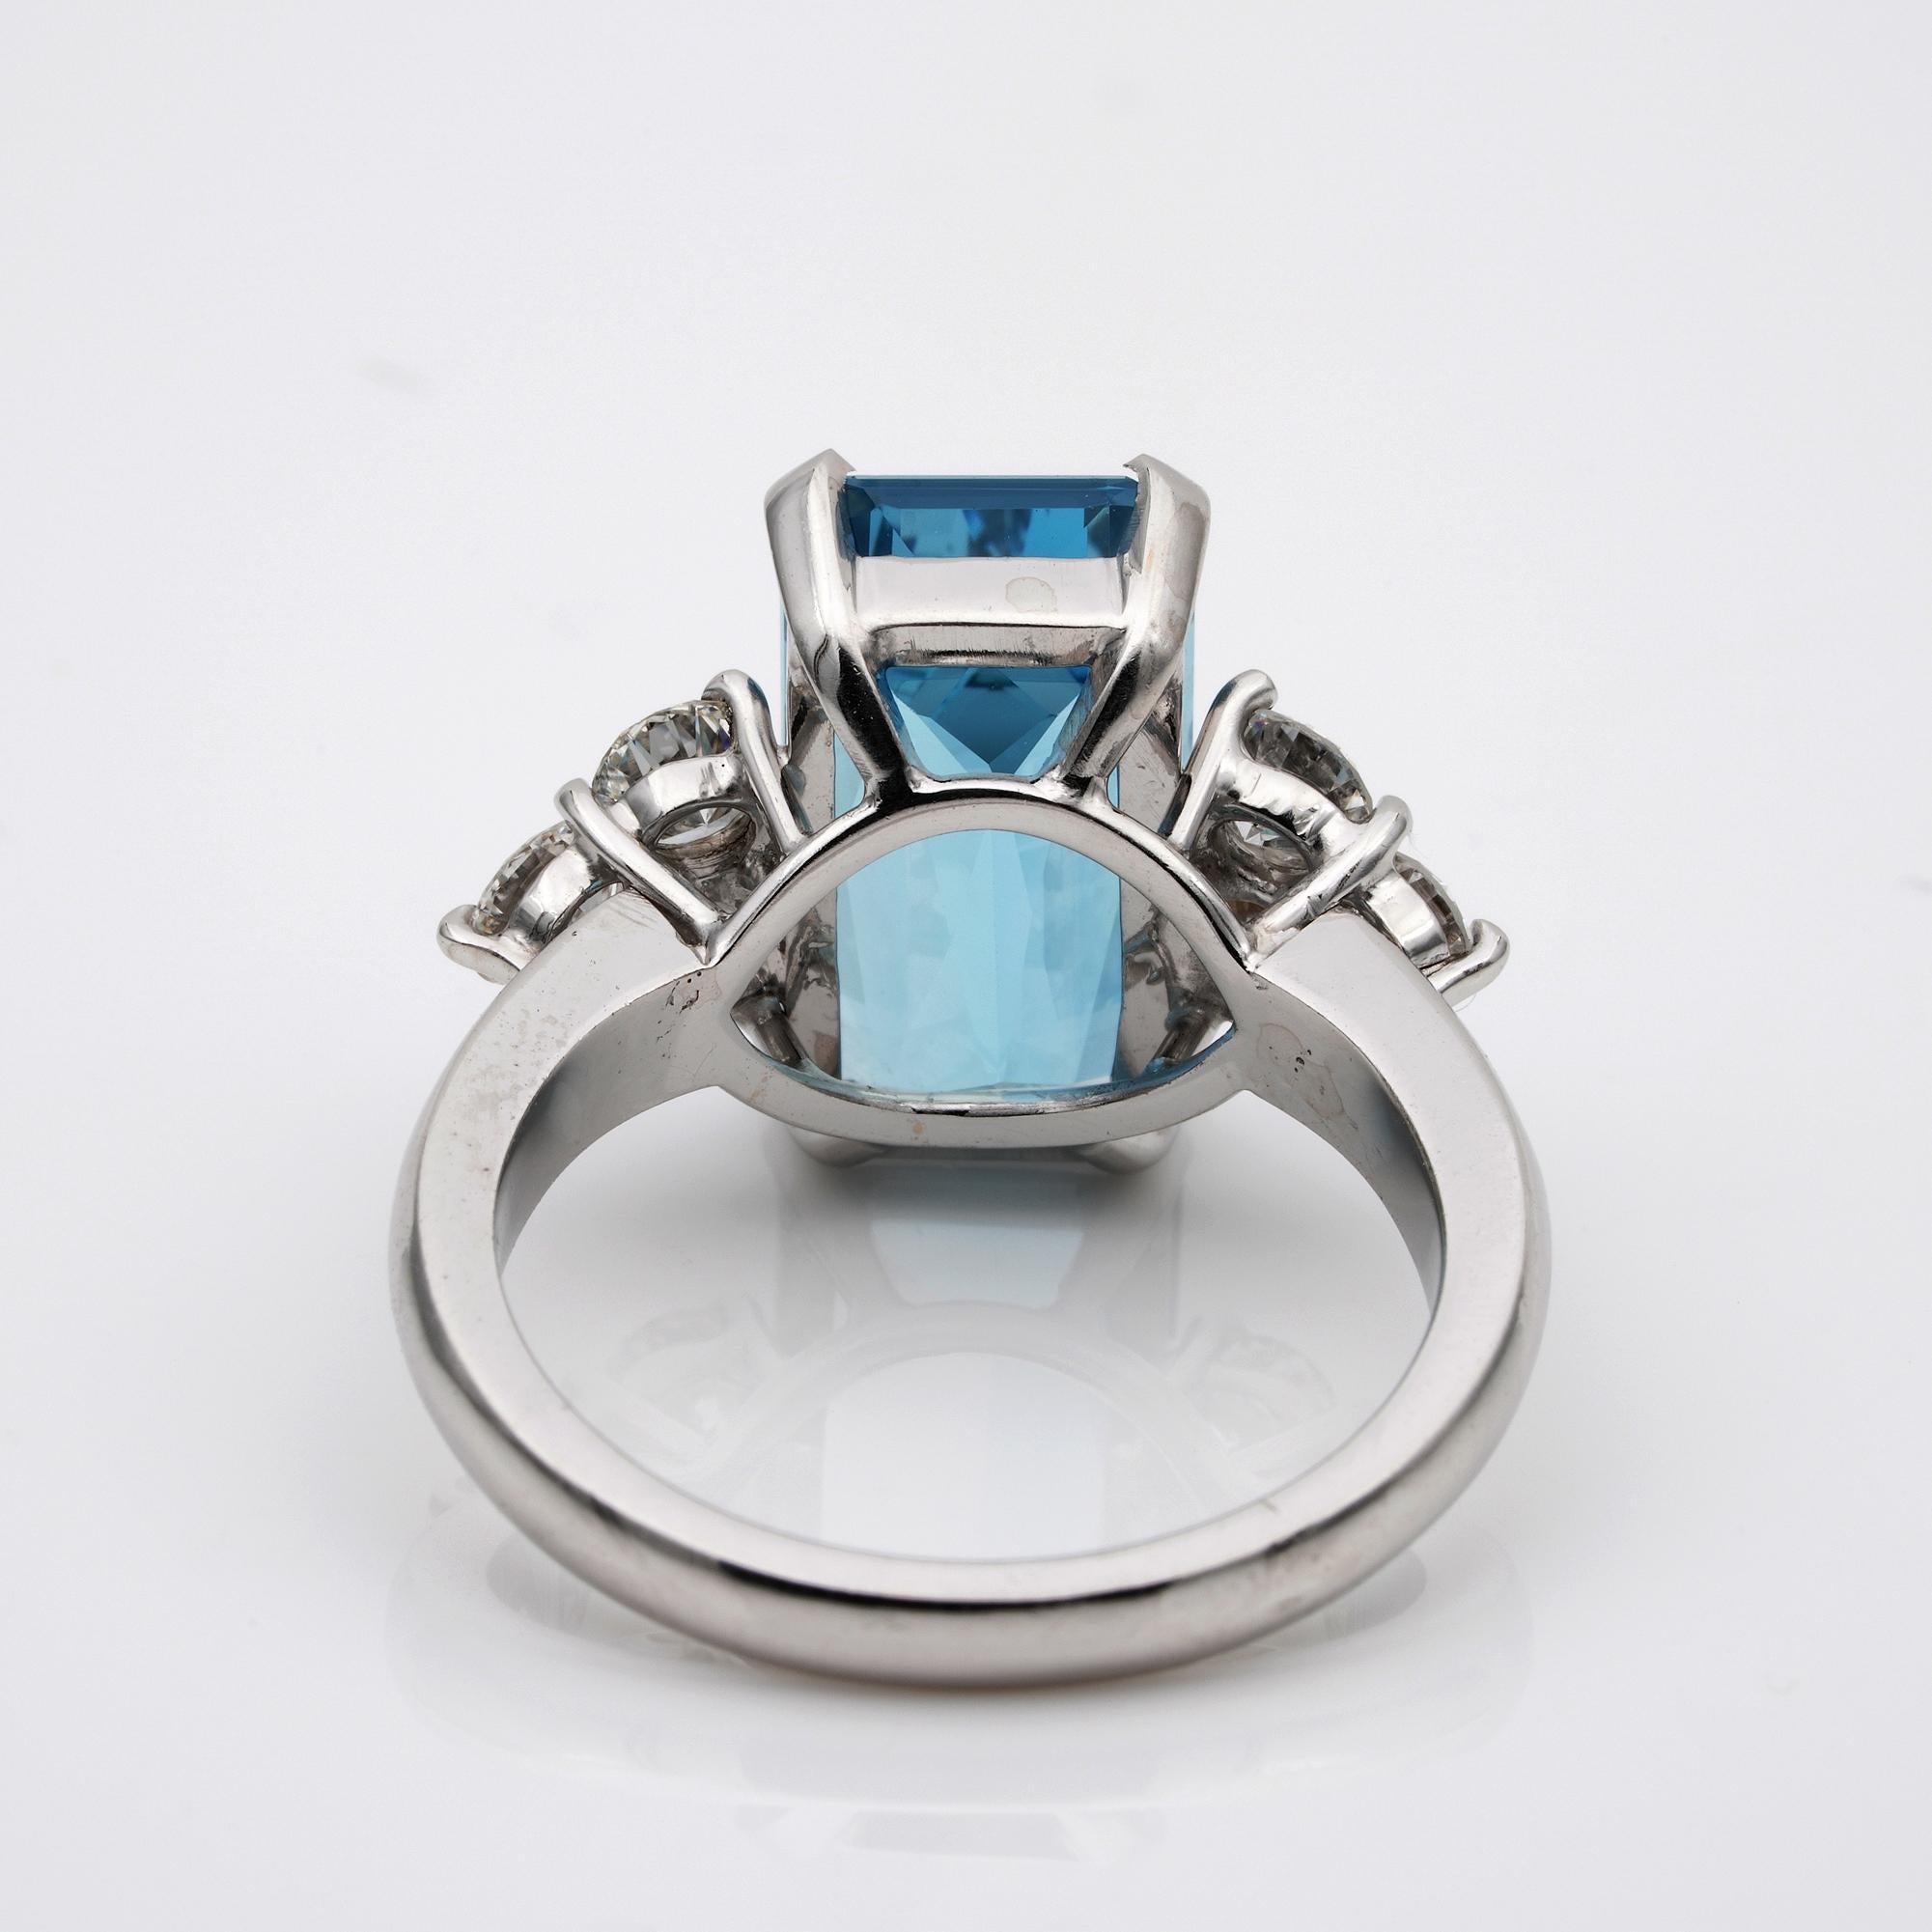 Magnificent 4.70 Carat Aquamarine and Diamond High Quality Engagement Ring For Sale 2